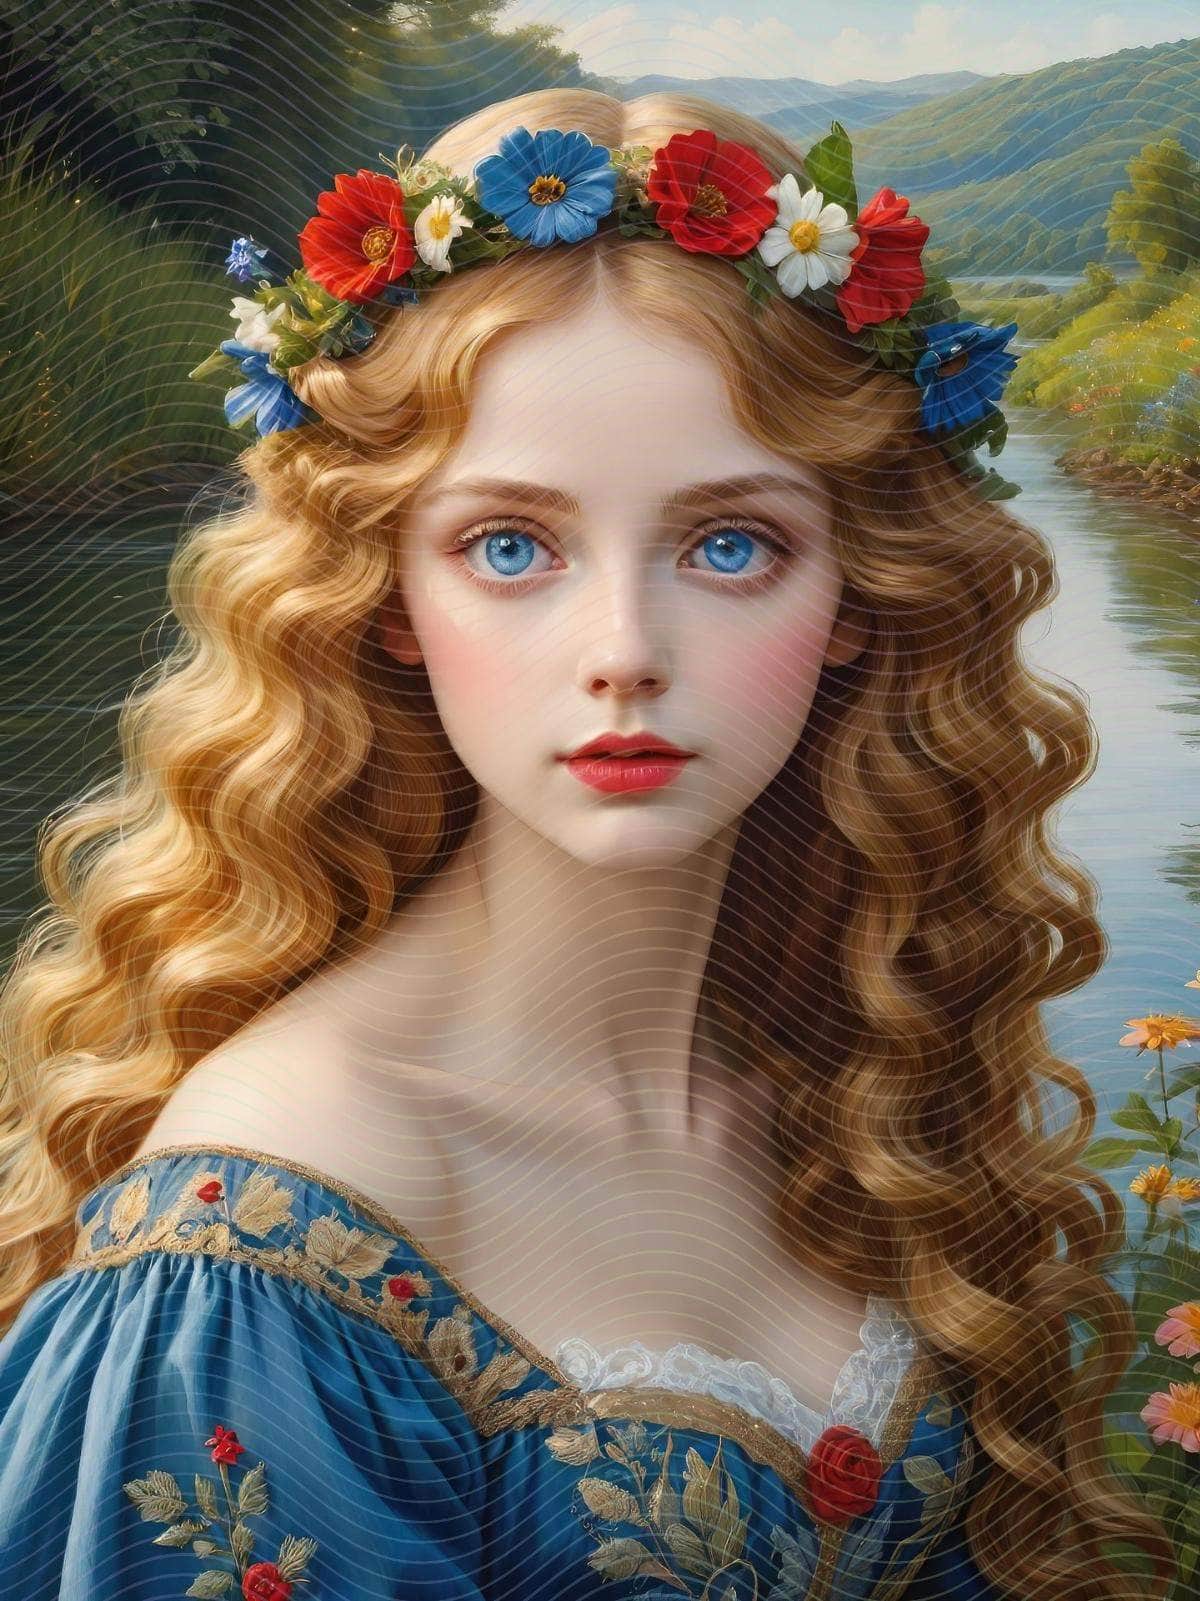 Vintage Painting of A Woman in Flowers in Her Hair